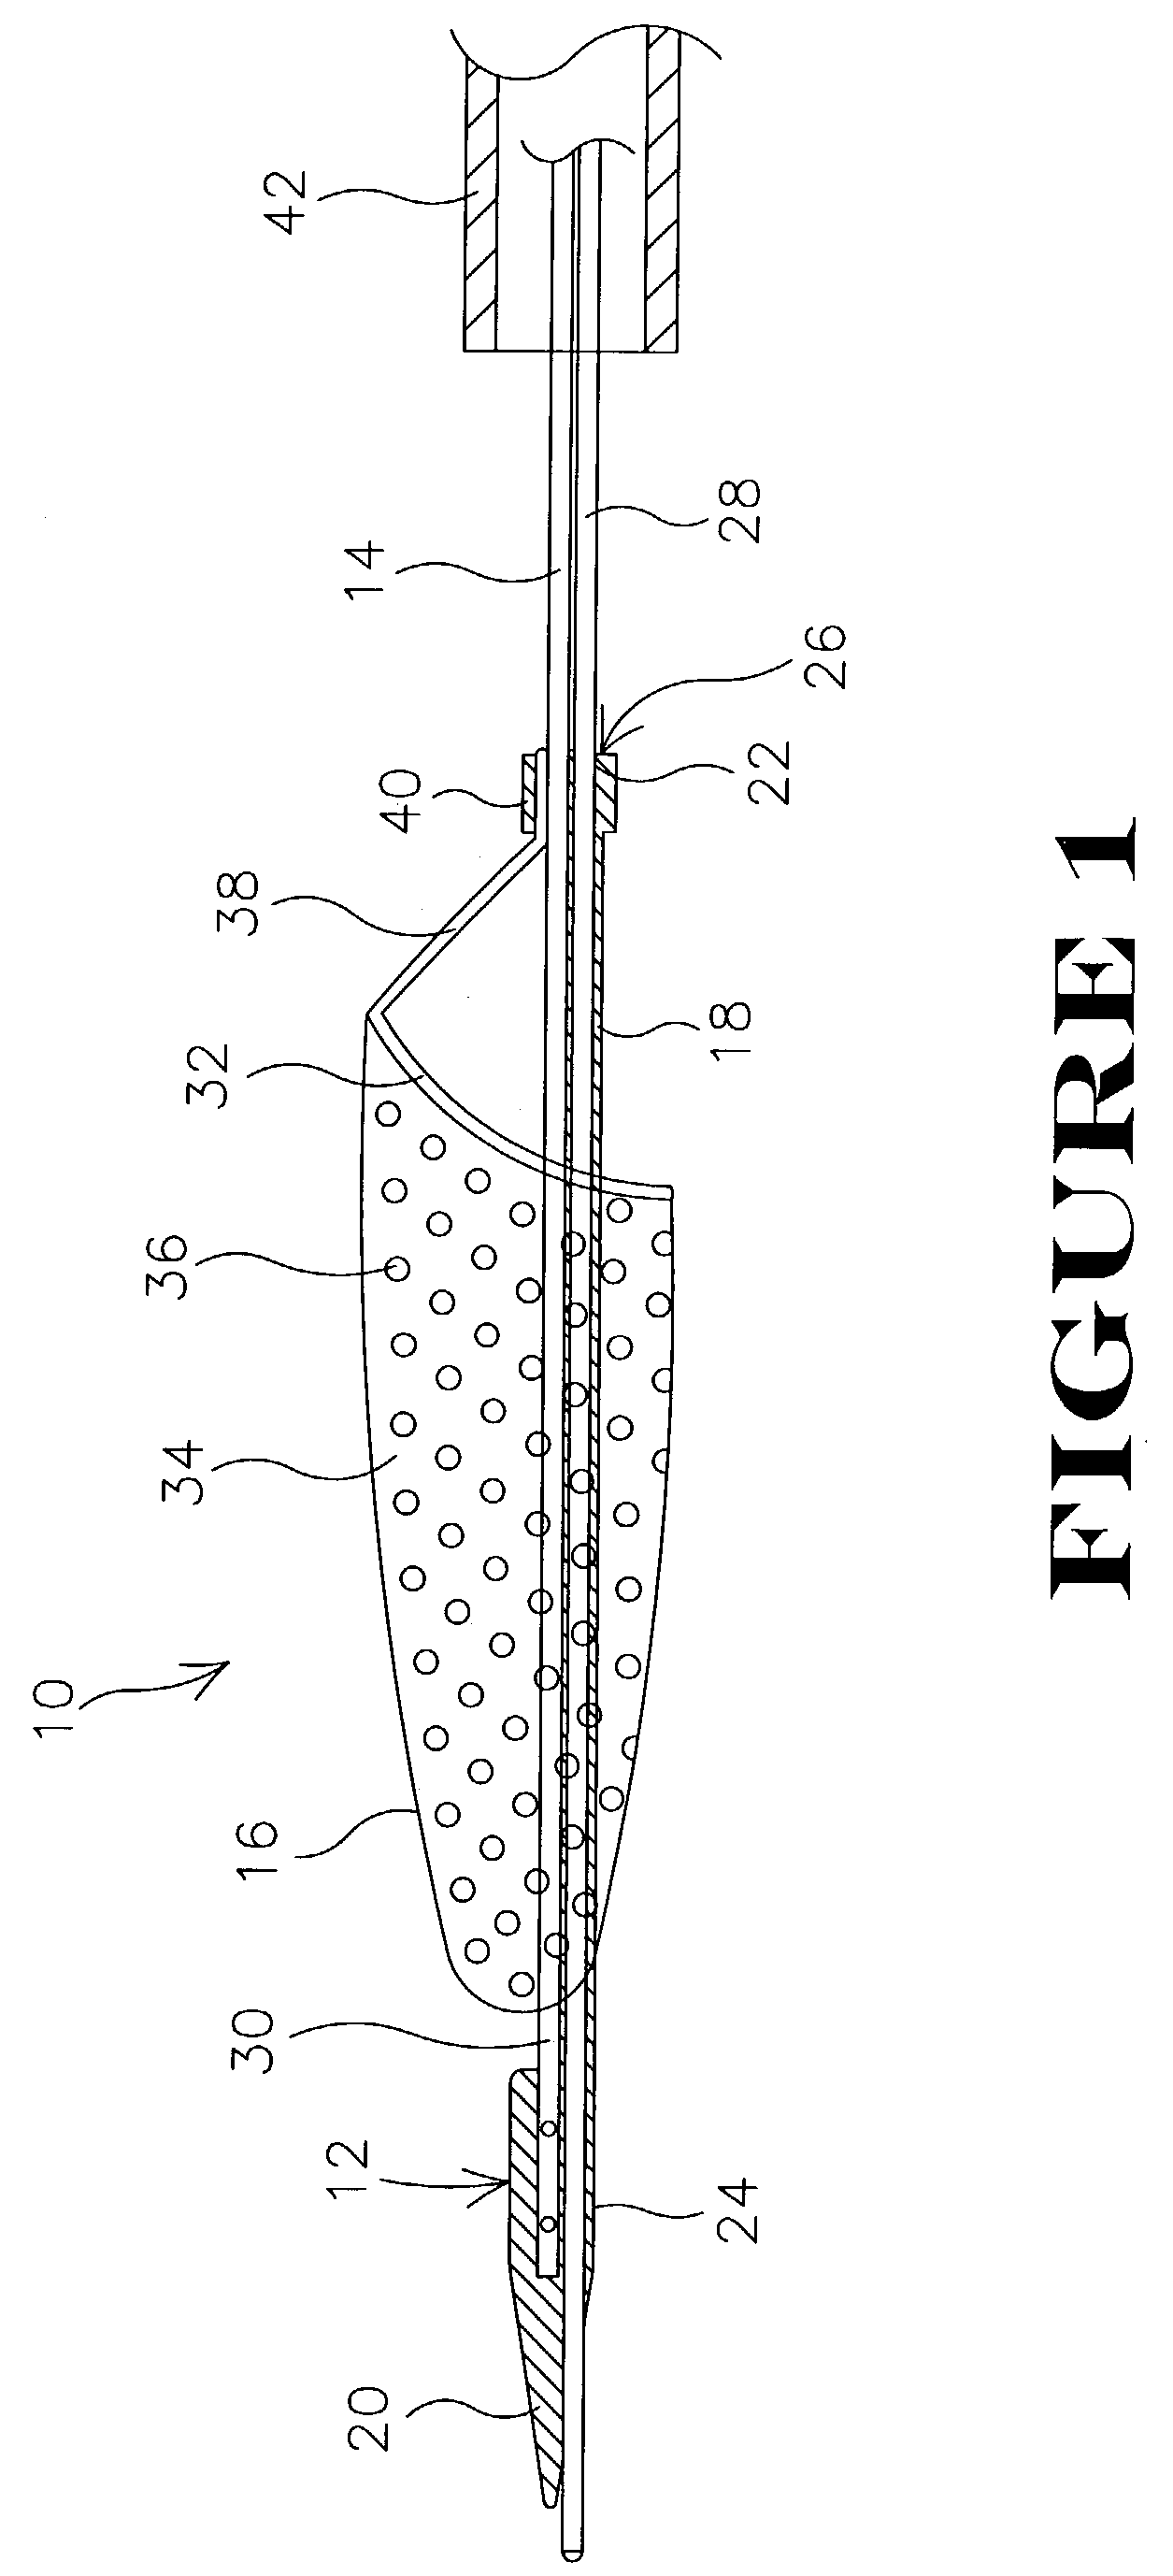 Embolic protection filtering device that can be adapted to be advanced over a guidewire